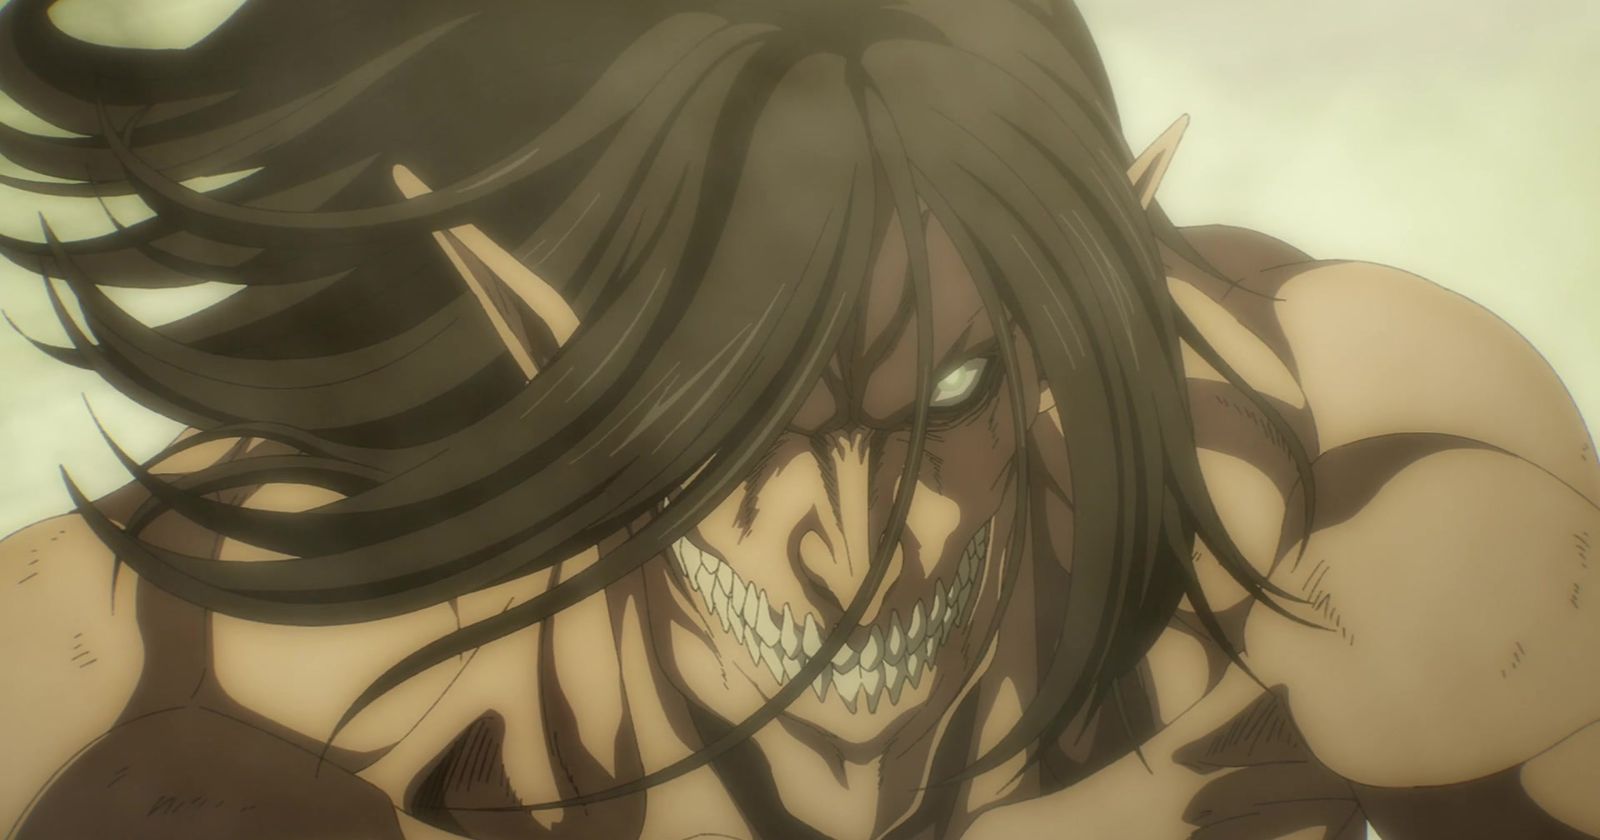 How do I watch 'Attack on Titan' Season 4, Part 2 on Funimation? 